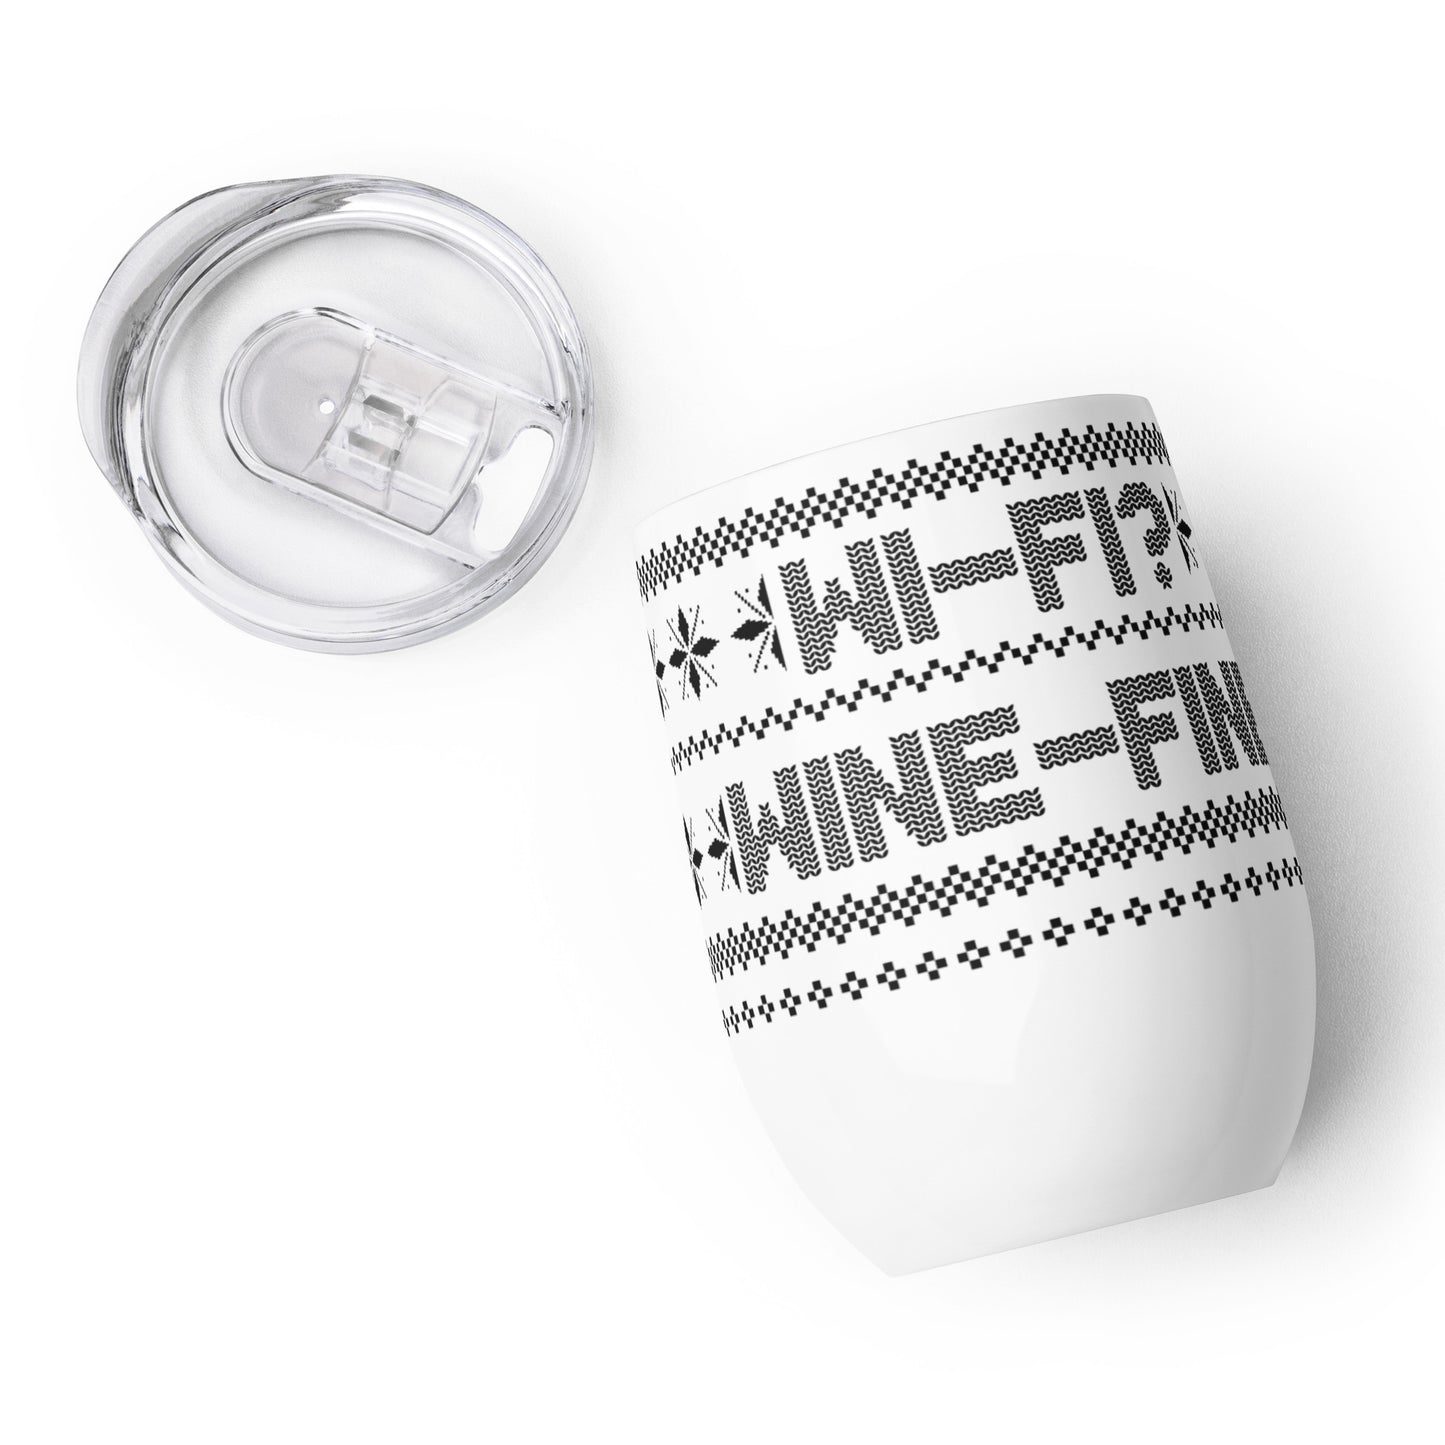 RouteThis - "Wine-Fine" Ugly Sweater Design Wine tumbler